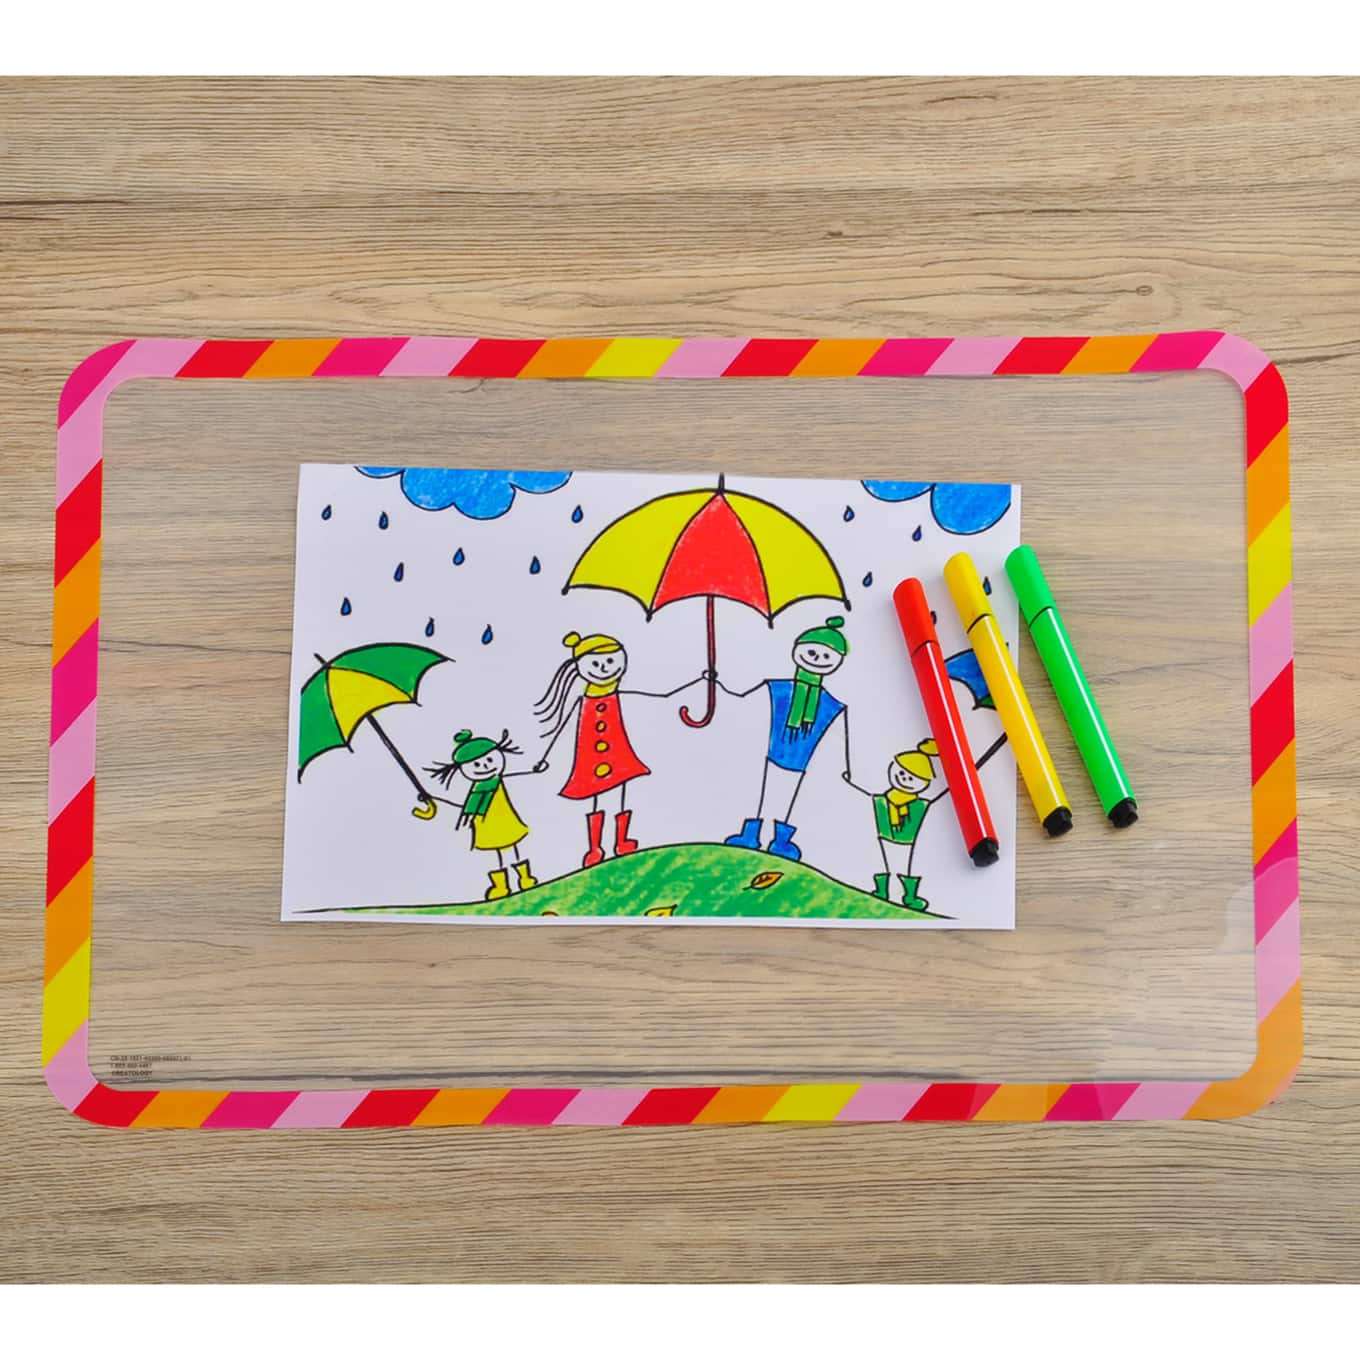 Artbox Children's Messy Mat Ideal for Use at Home or School - Bargain  WholeSalers